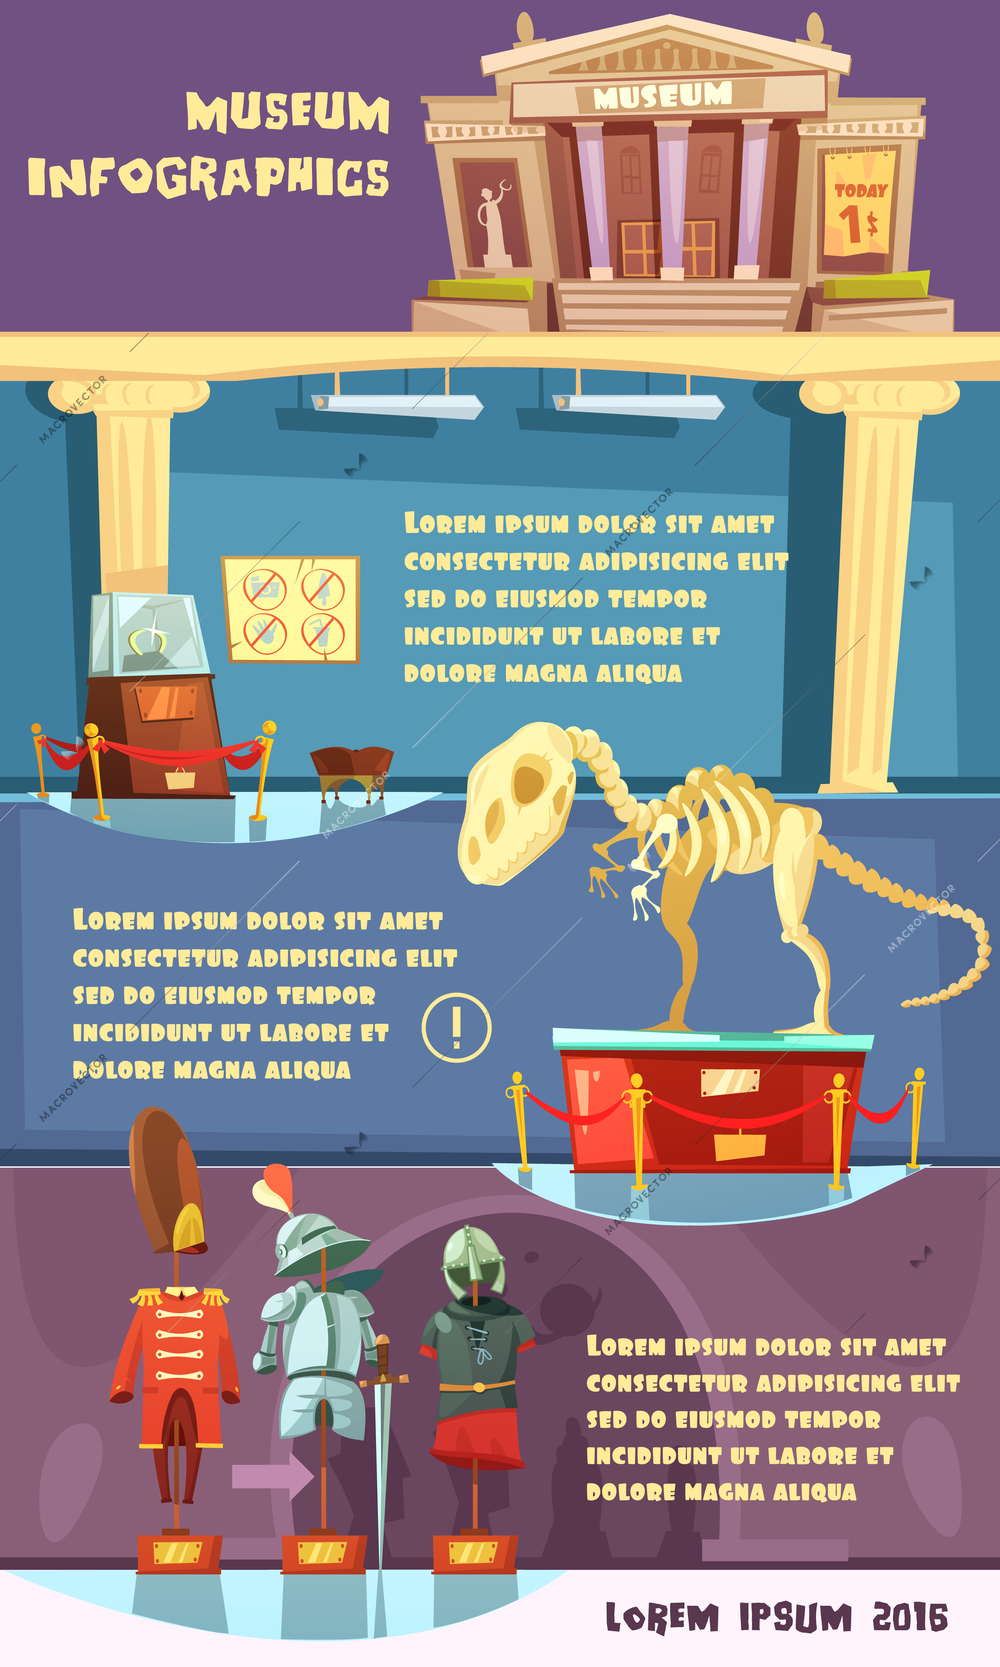 Color cartoon infographic with title description room and exhibits of museum vector illustration